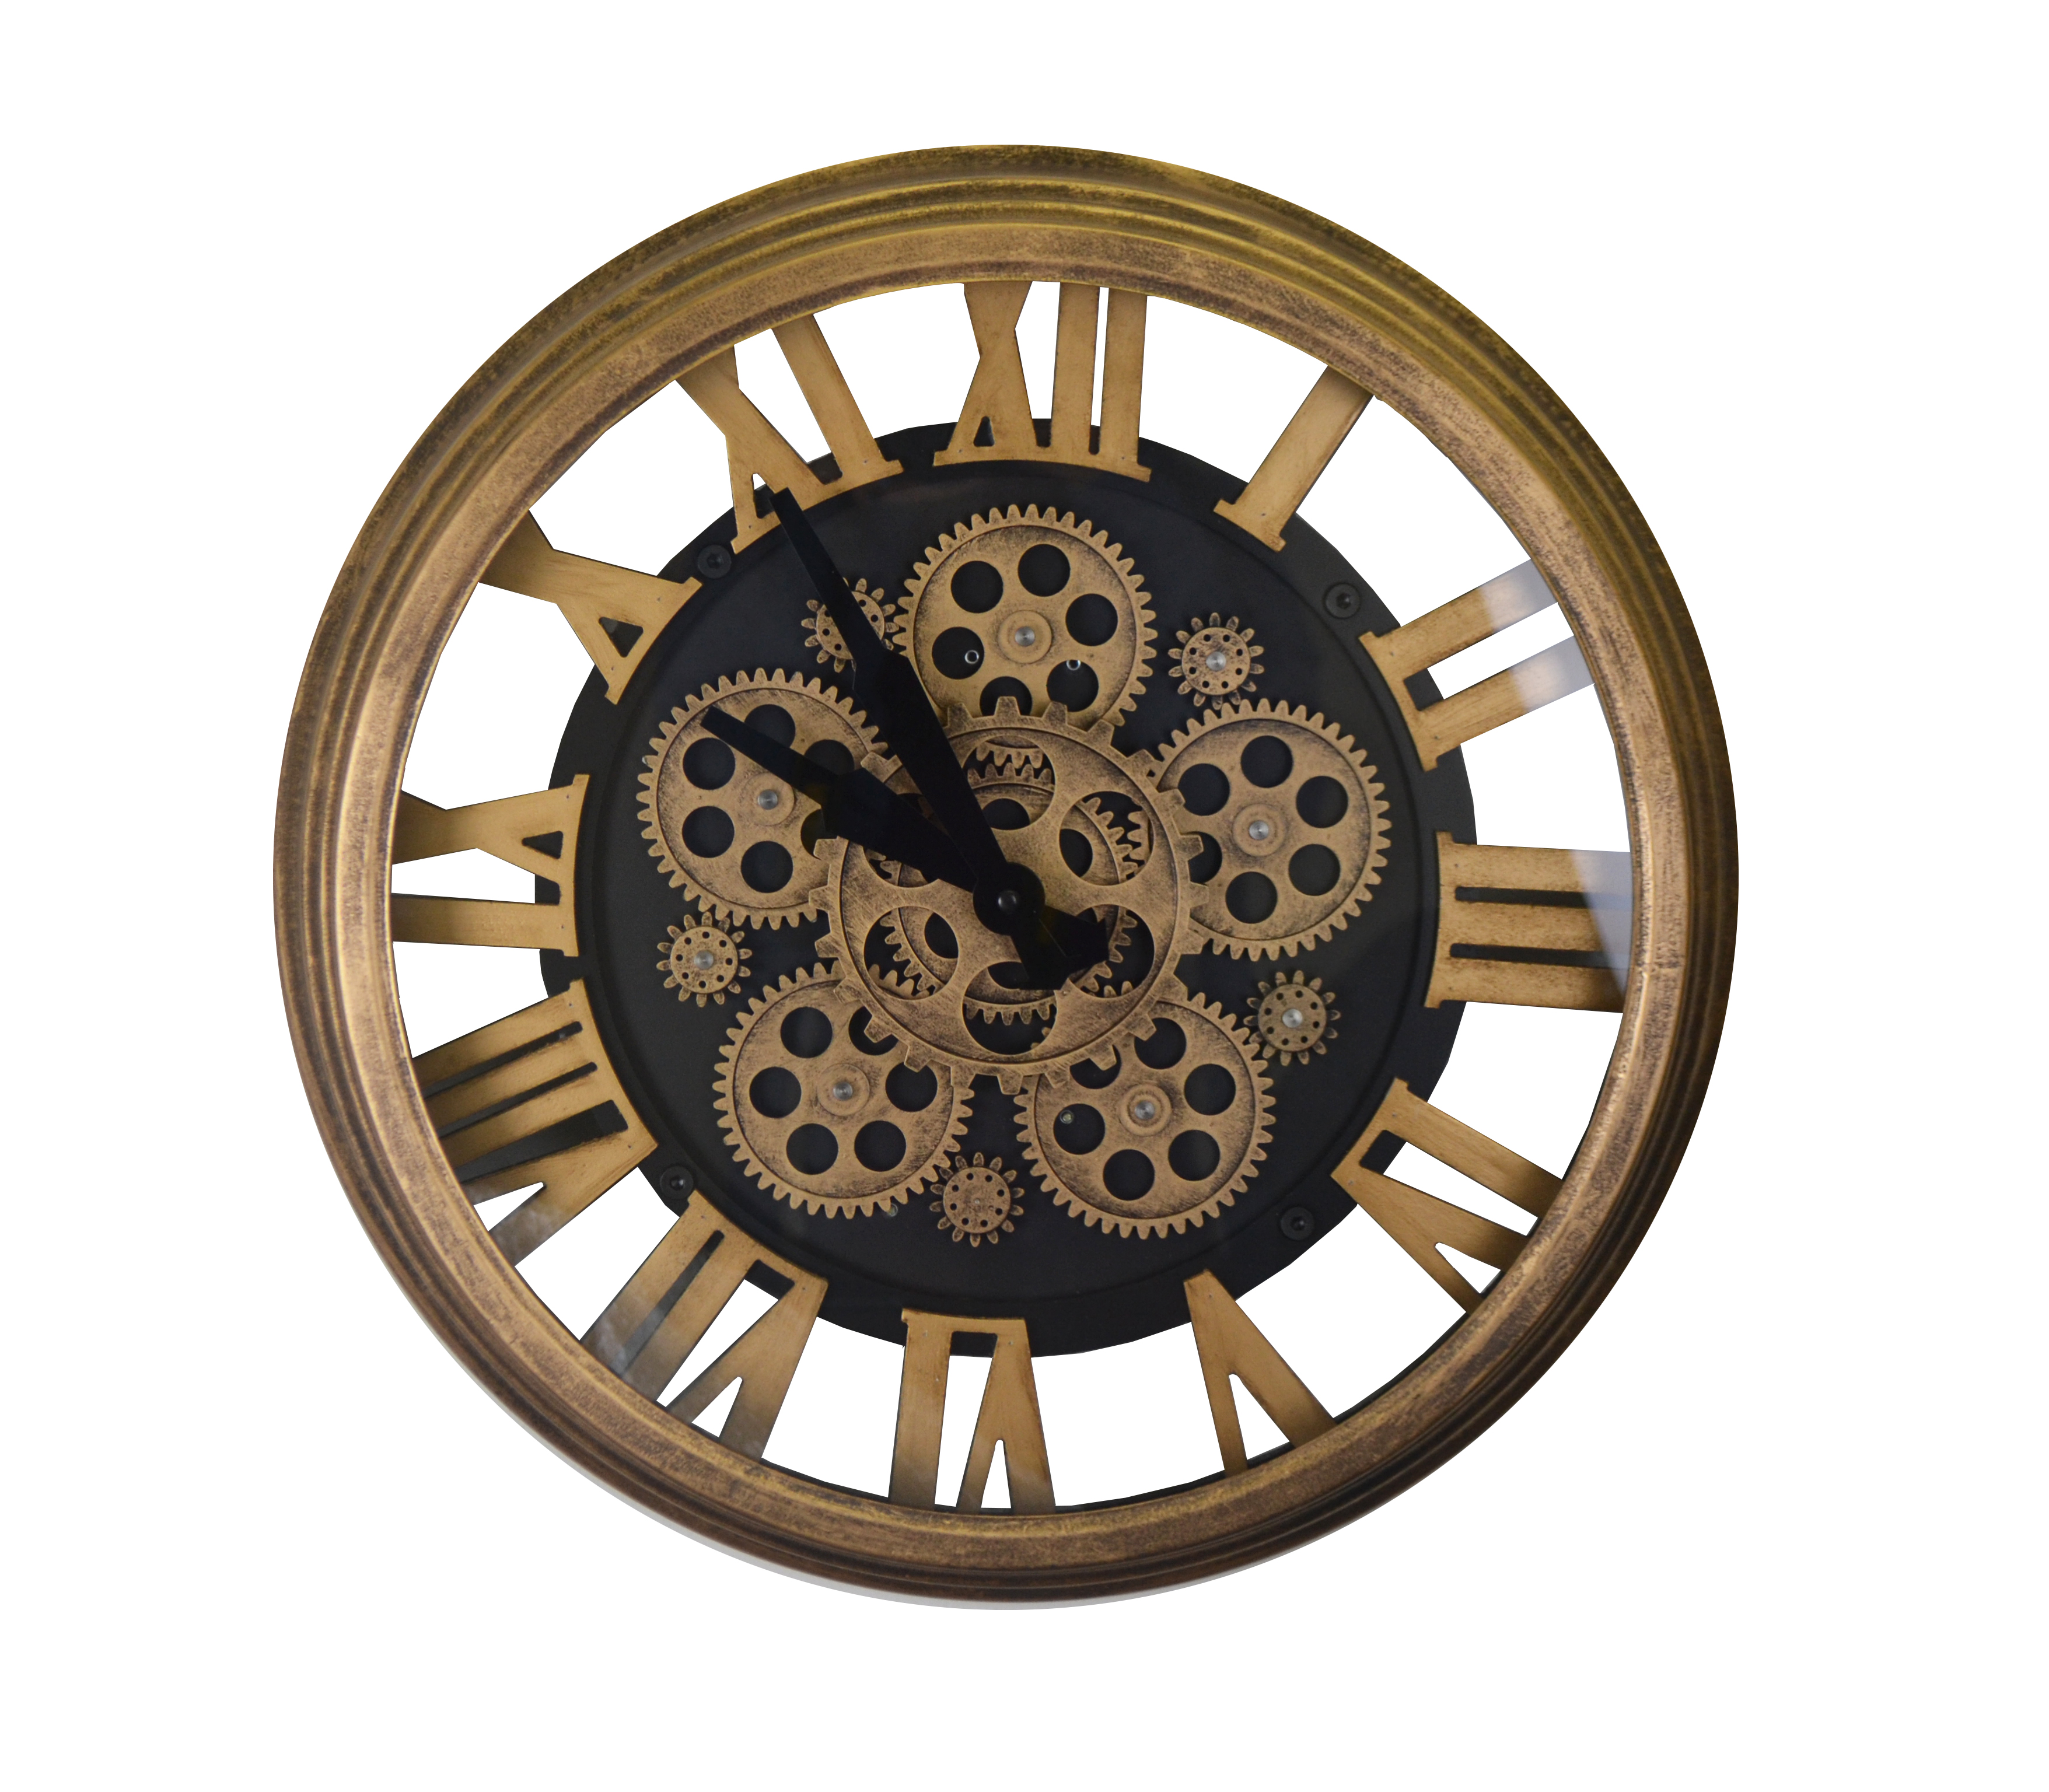 Steampunk Style Gold & Black Metal Wall Clock Moving Gears w/Roman Numerals